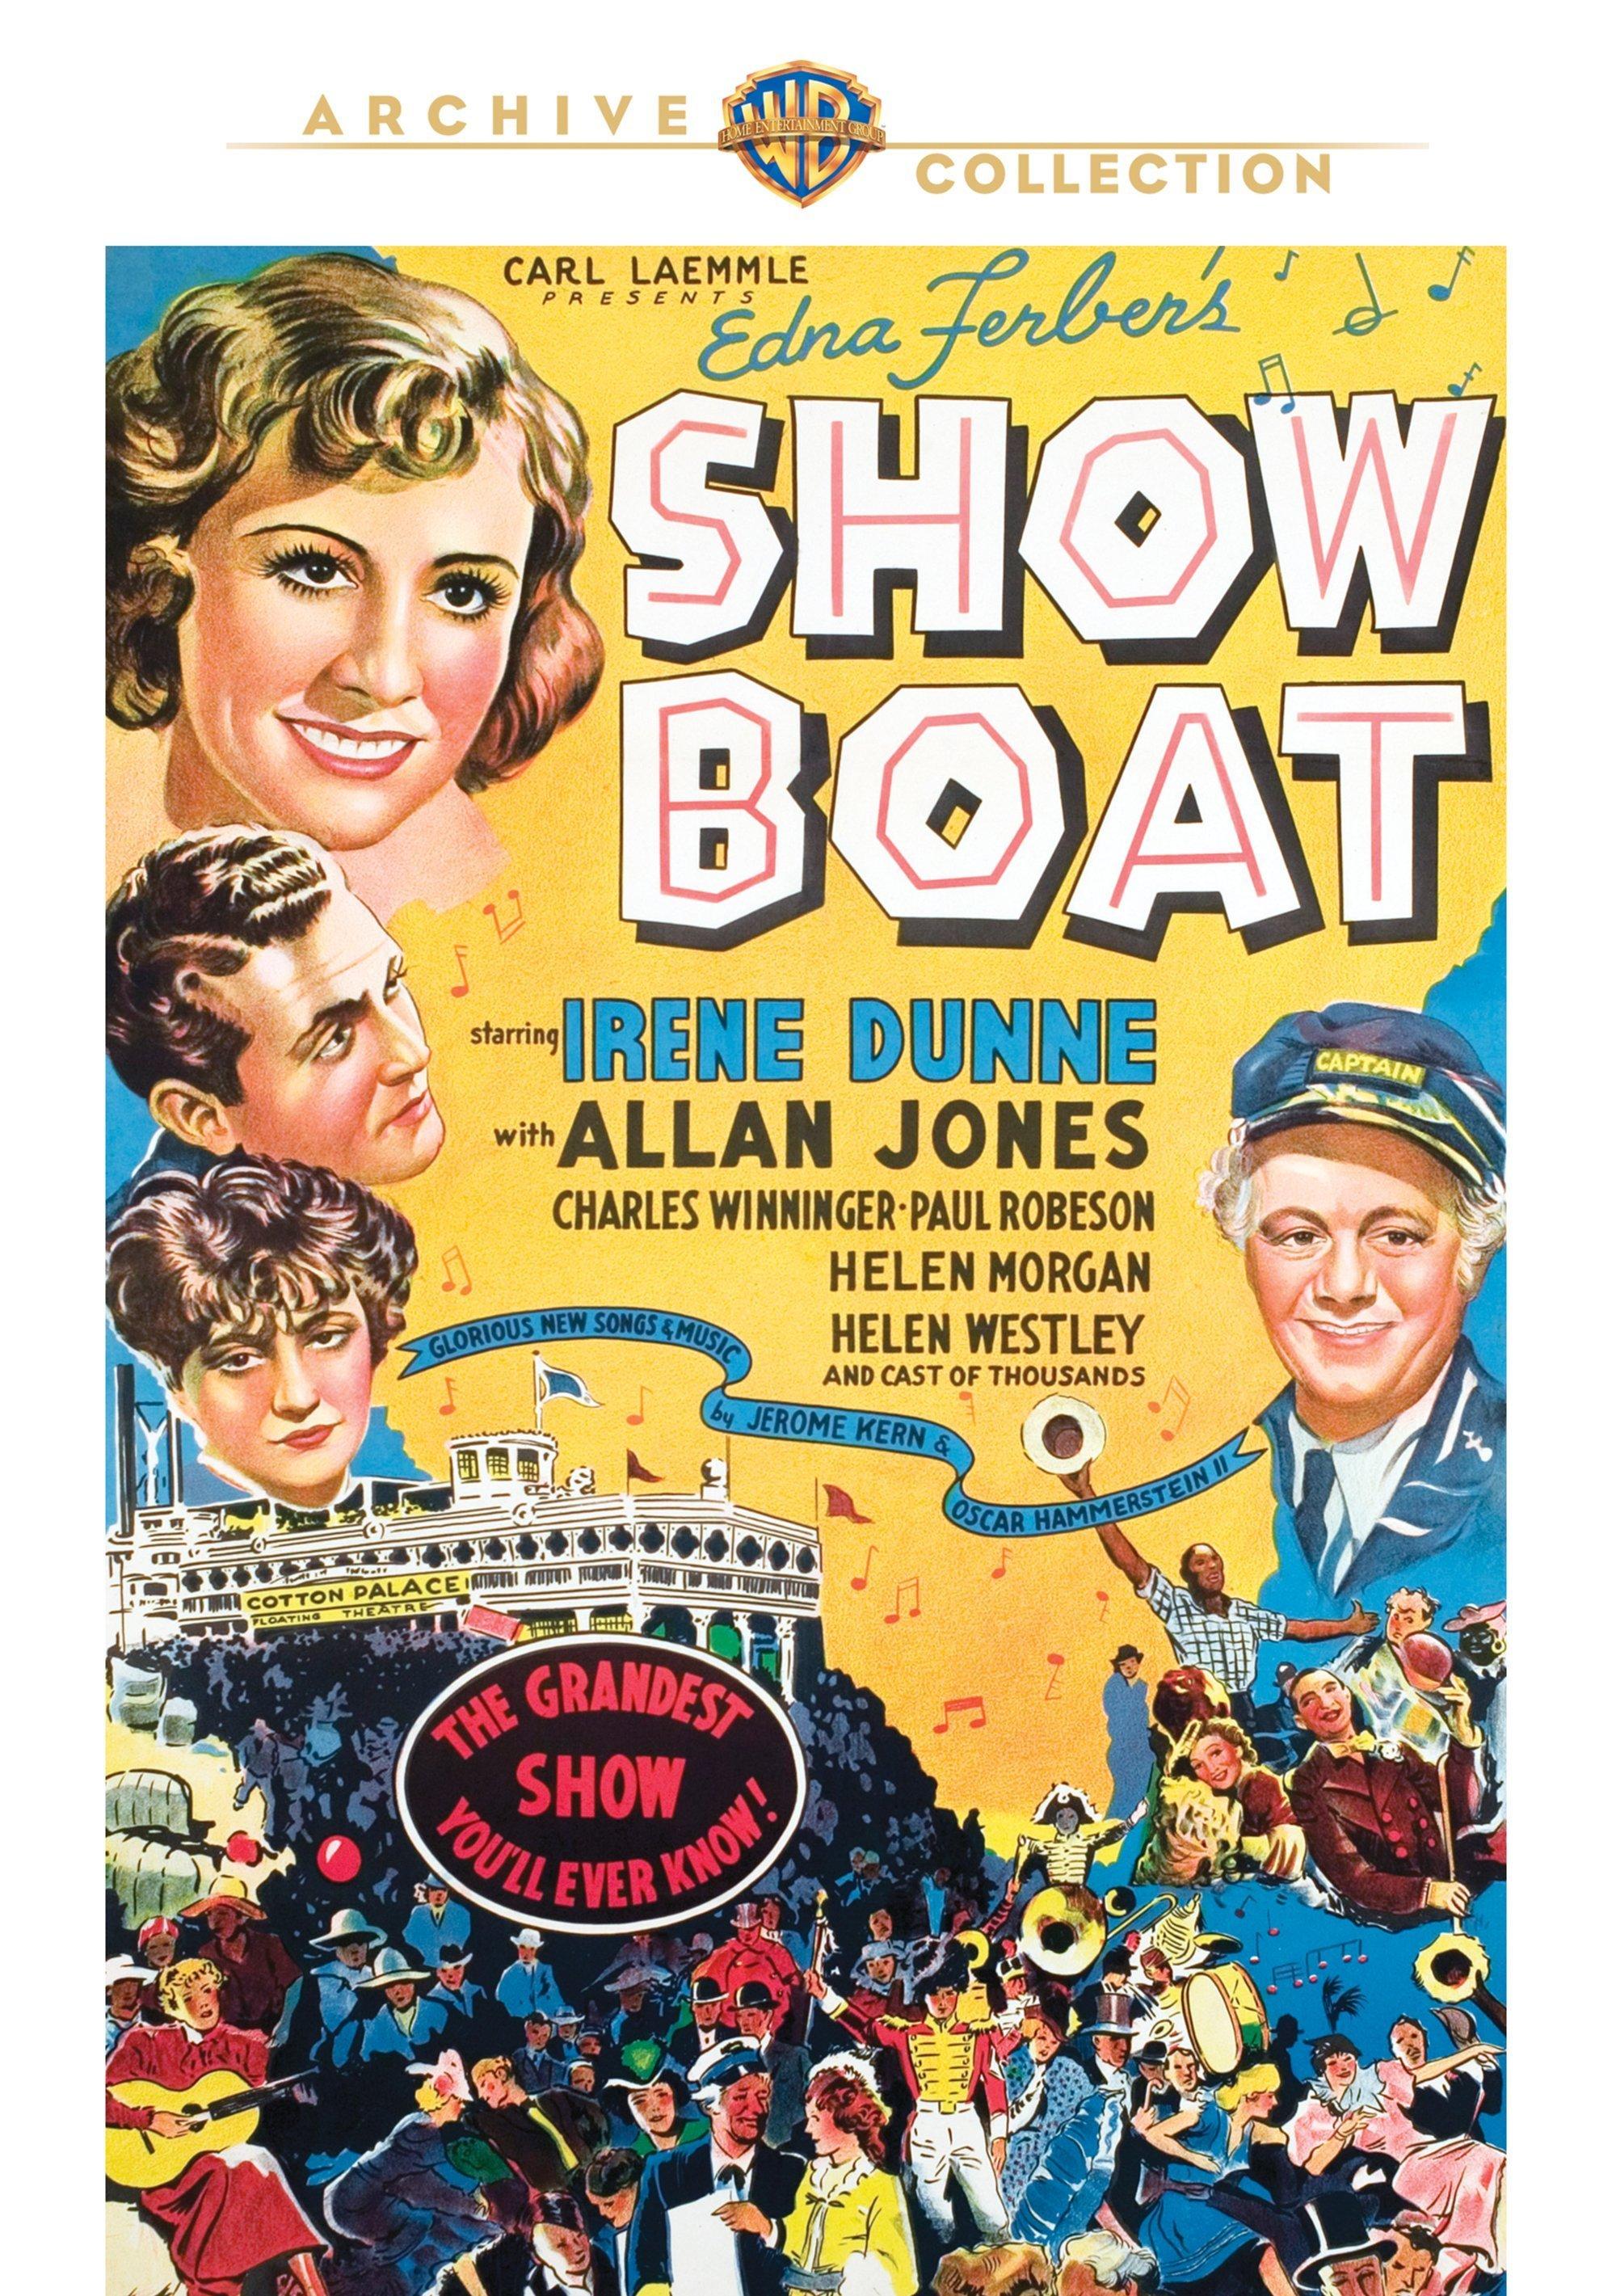 1936 Show Boat A Multiracial Musical Melodrama Now Out On Dvd St